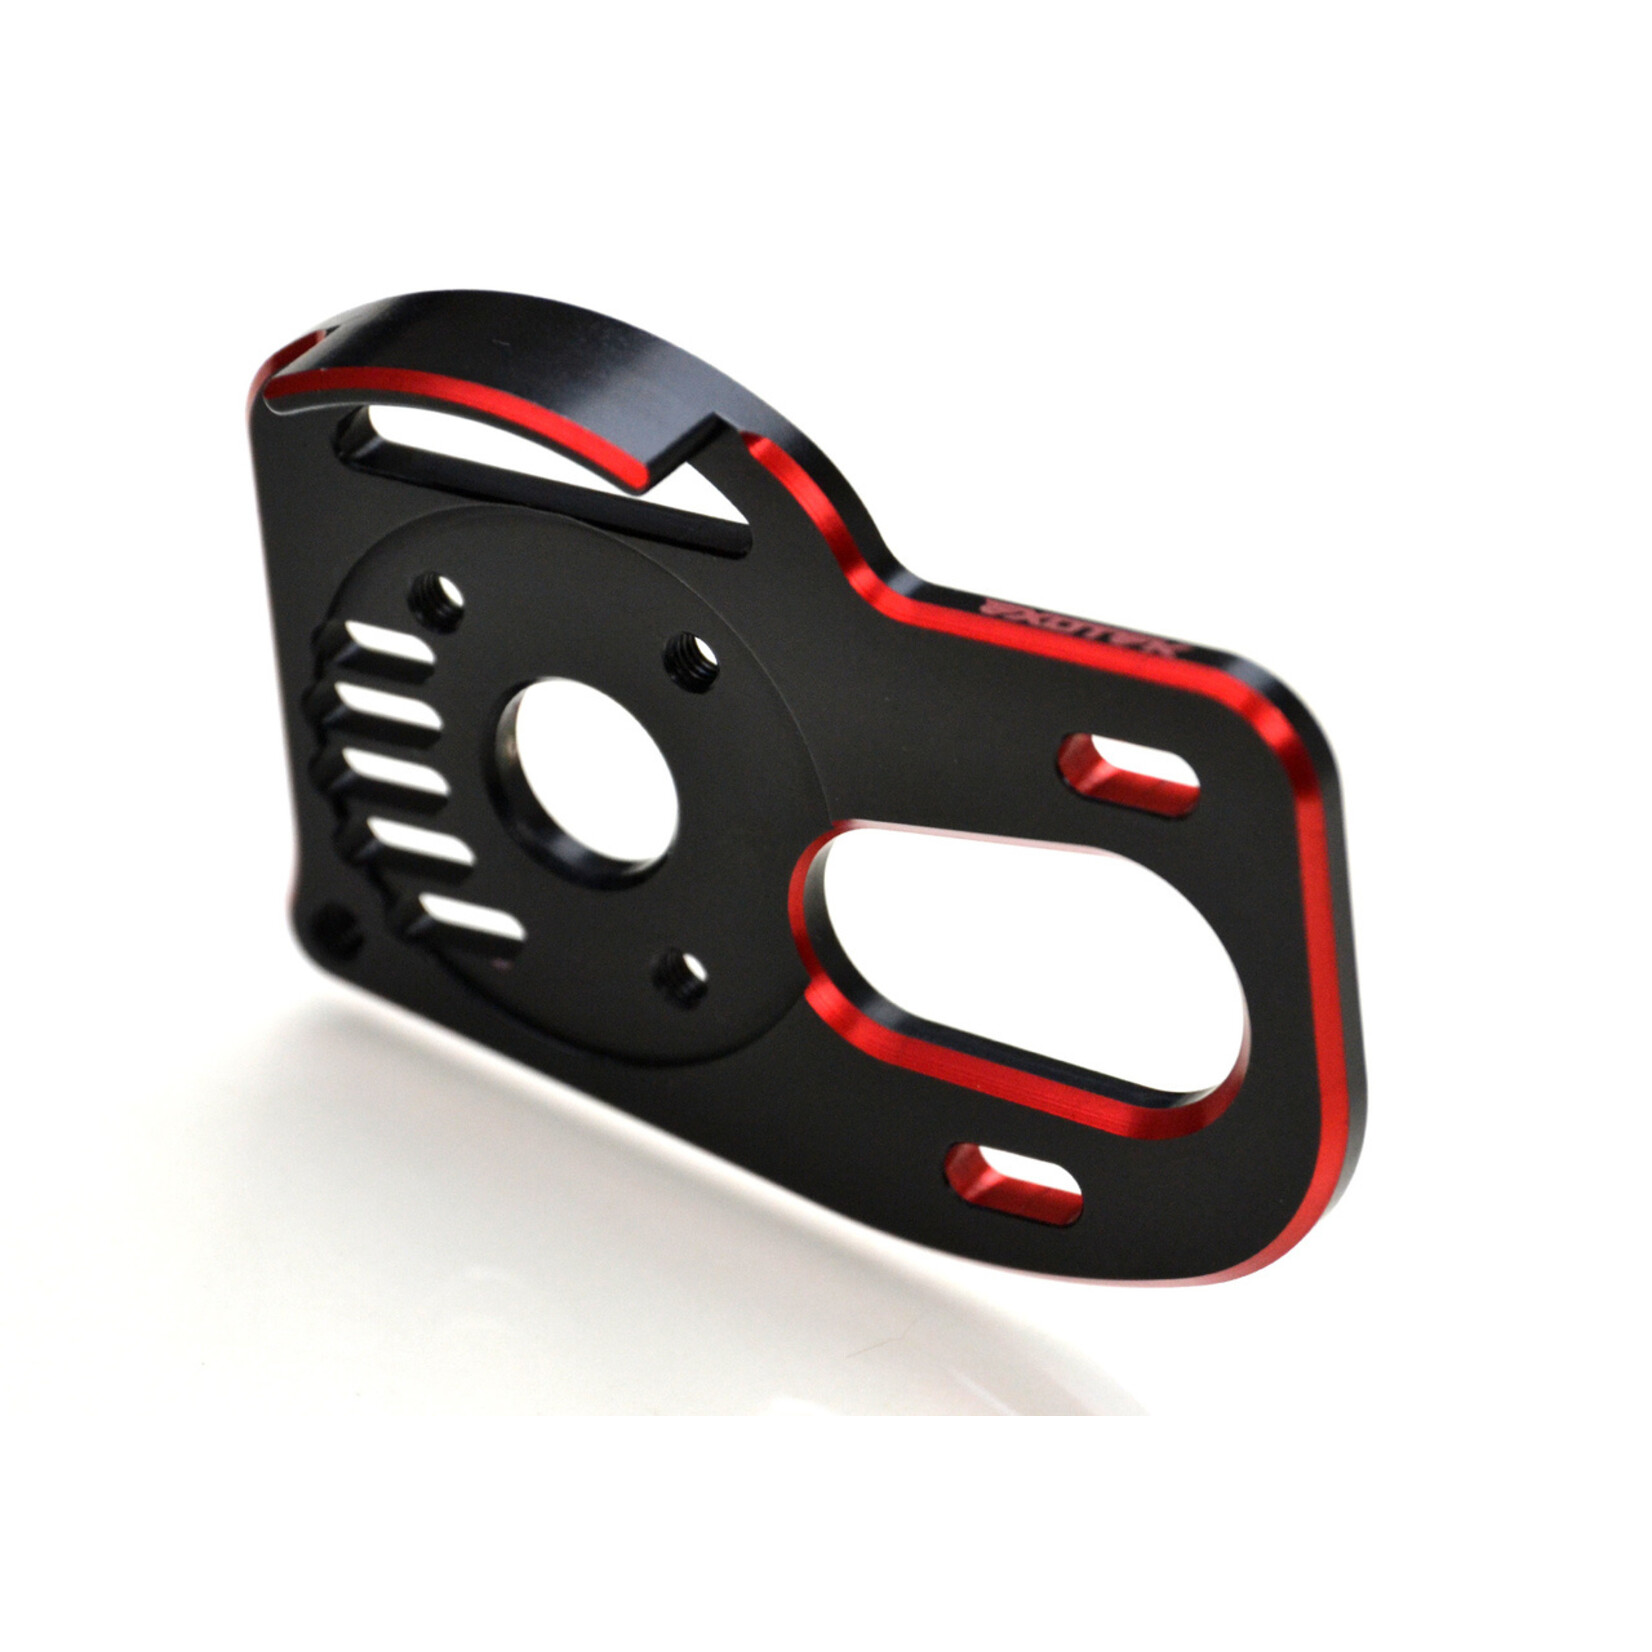 Exotek Racing RB7 HD Laydown Motor Plate w/ Gear Cover, 2 Color Anodizing